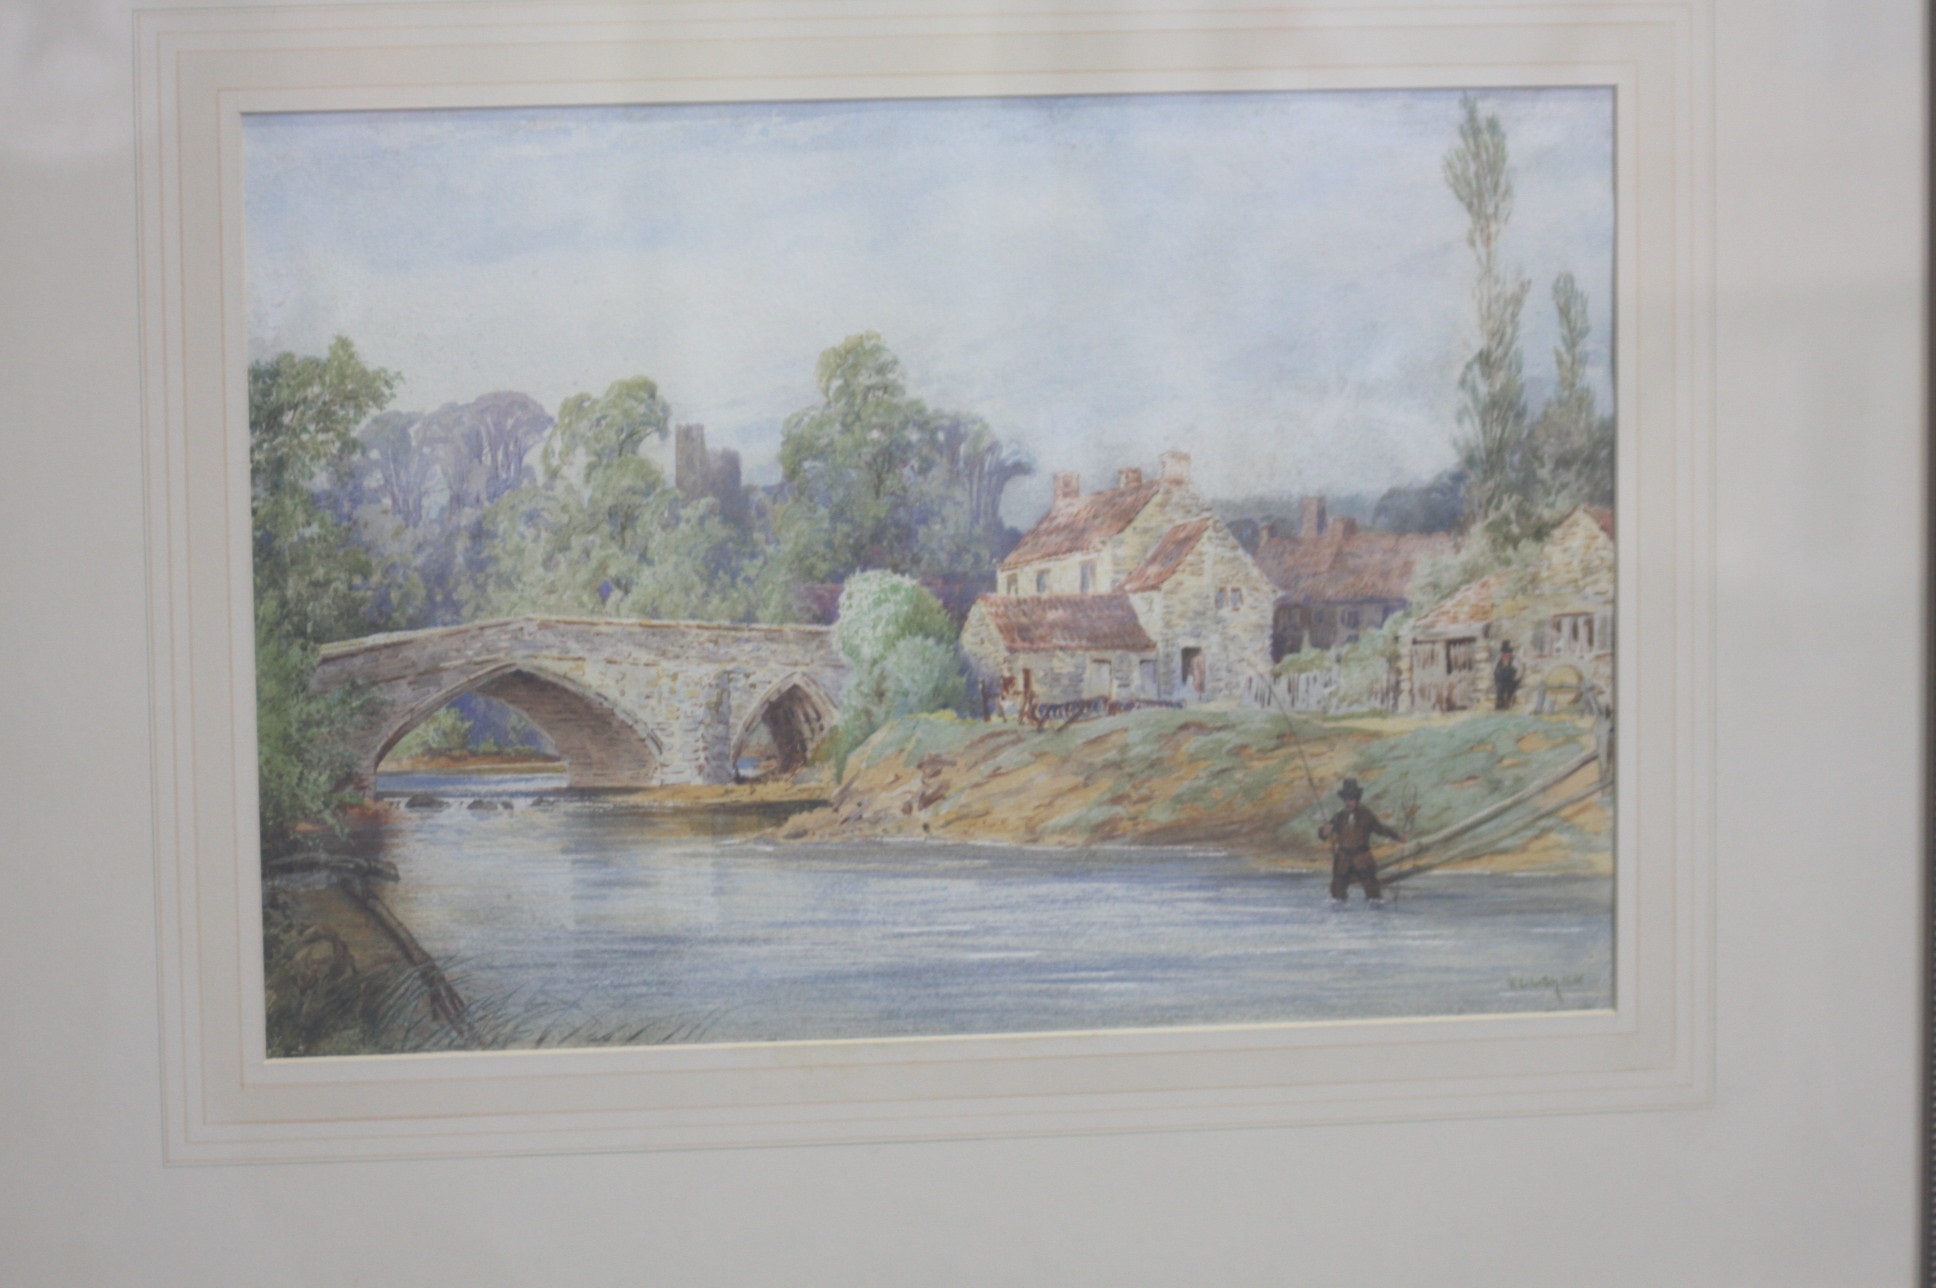 William Leighton Leach  1804-1883  Signed  Dated 1866  "Rural setting with gentleman fishing"  28 cm